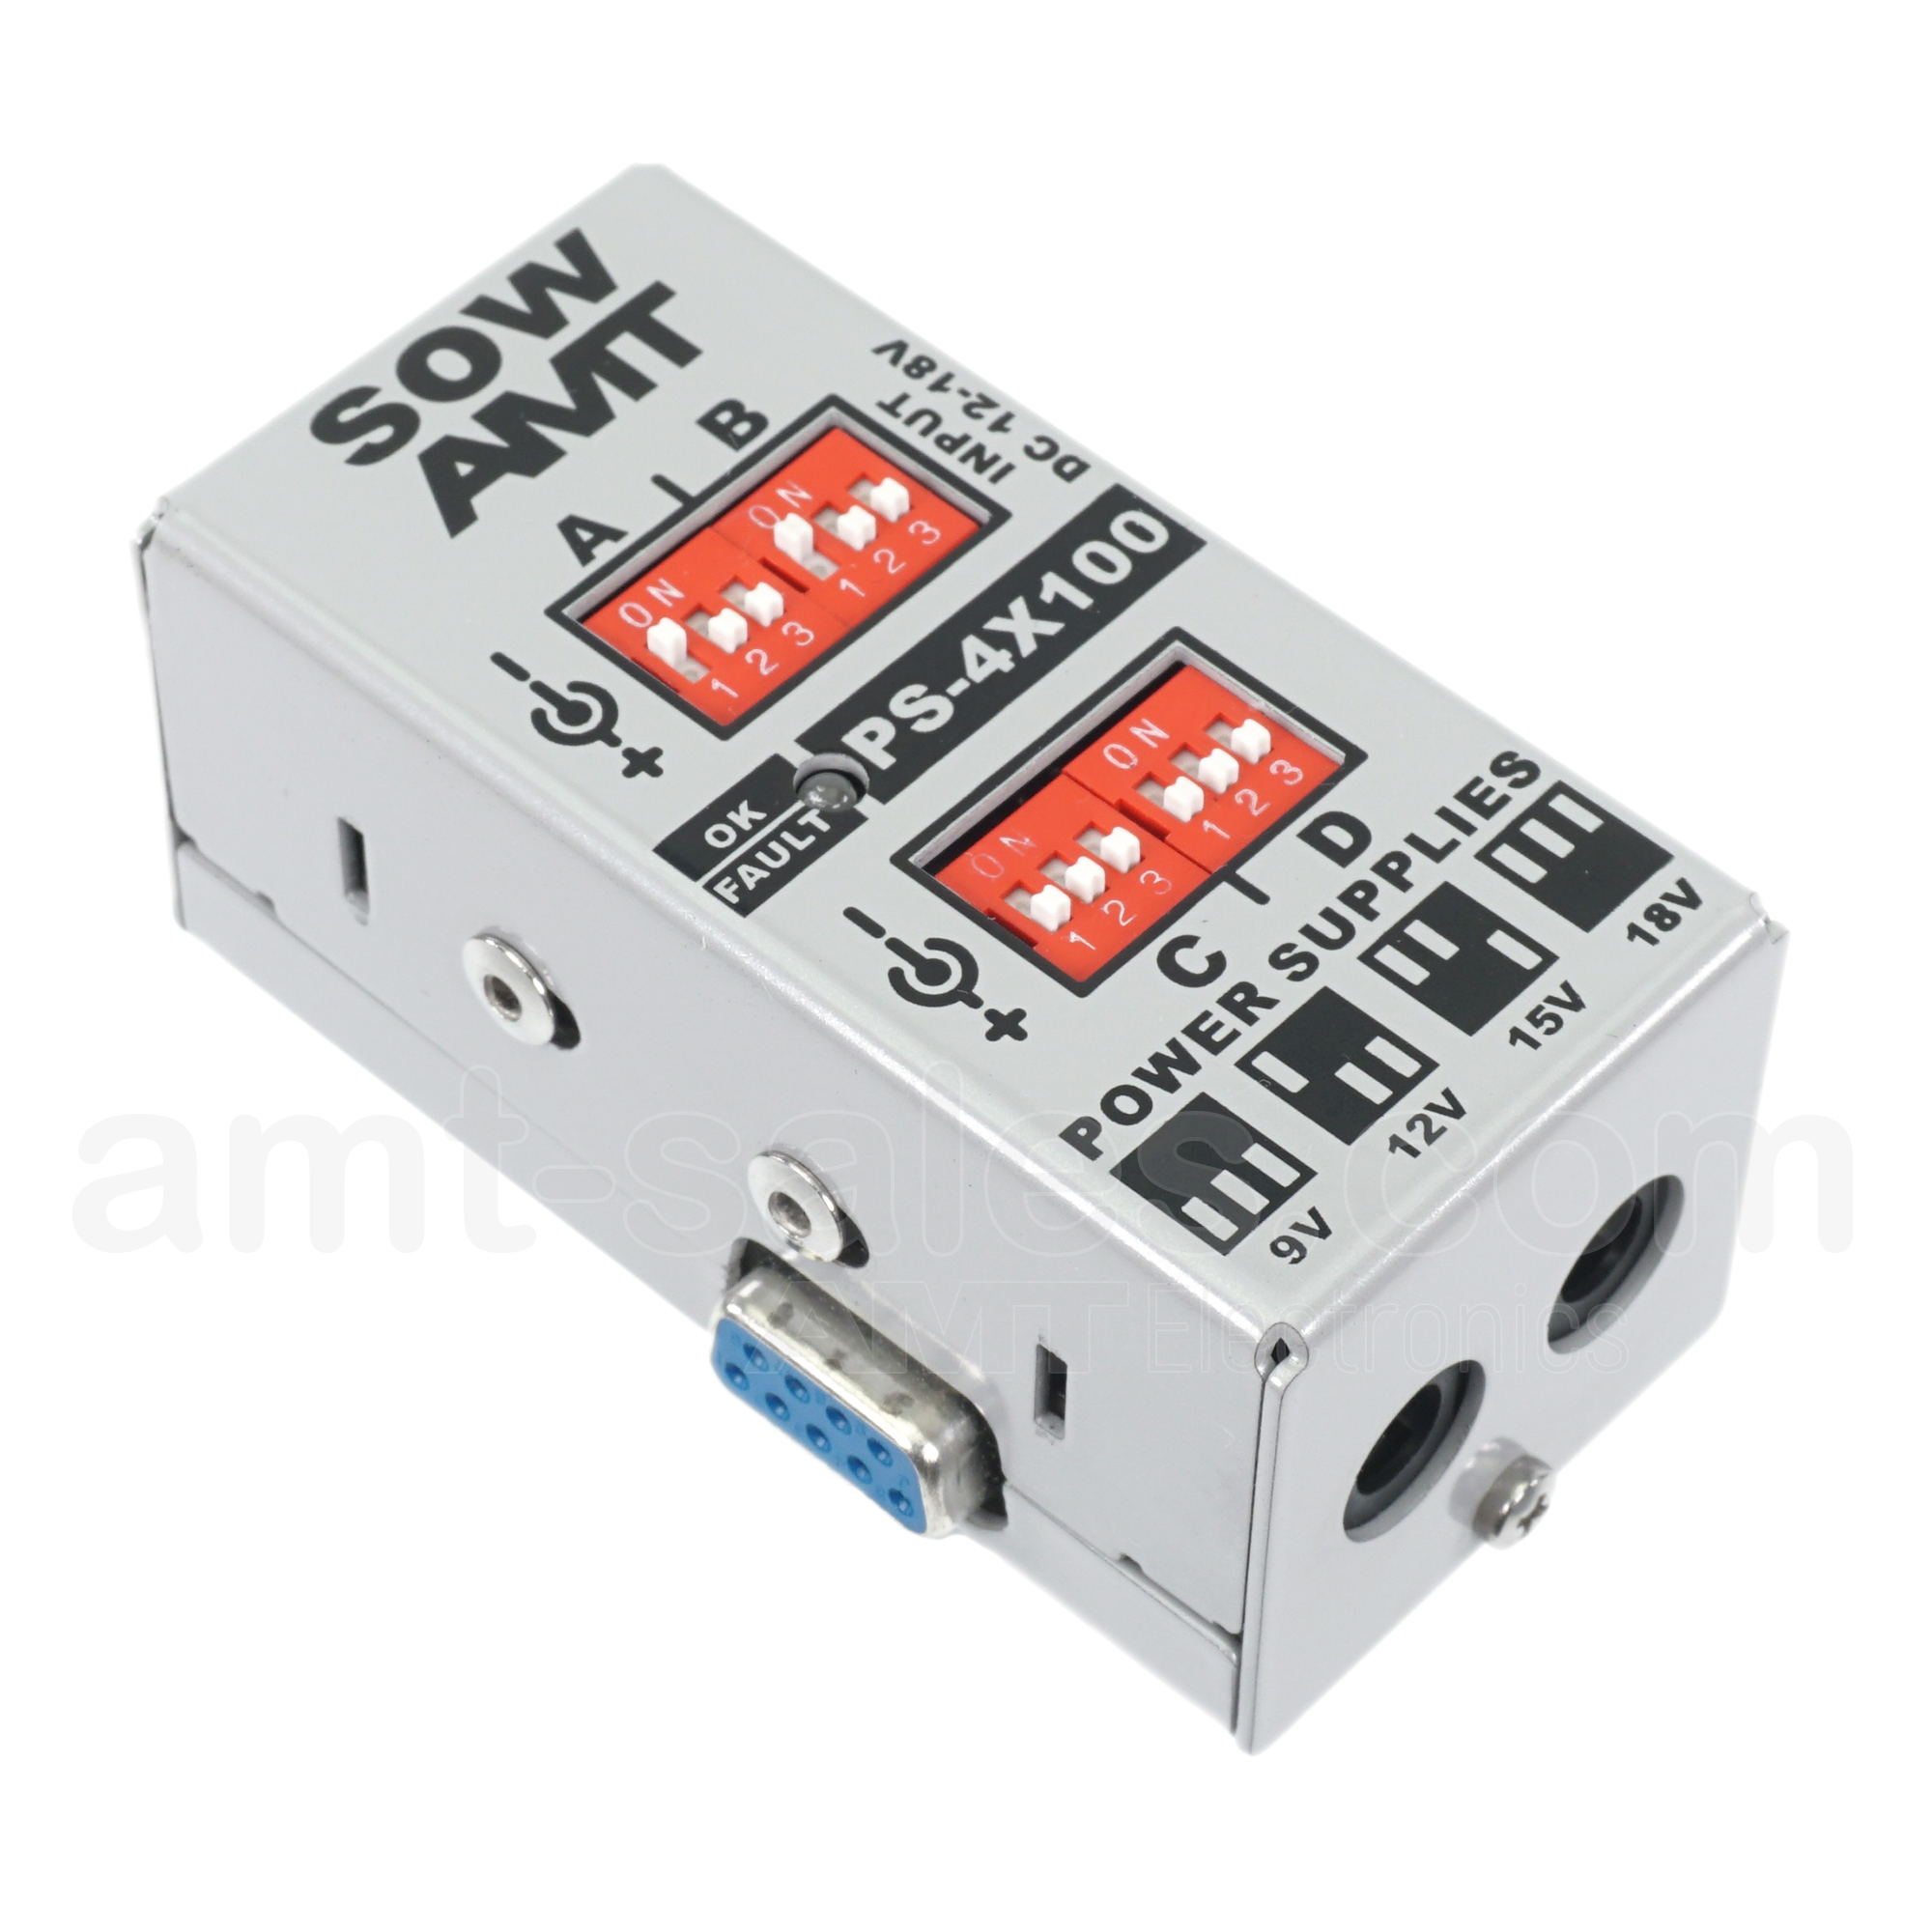 AMT SOW PS-4x100mA - power supply module